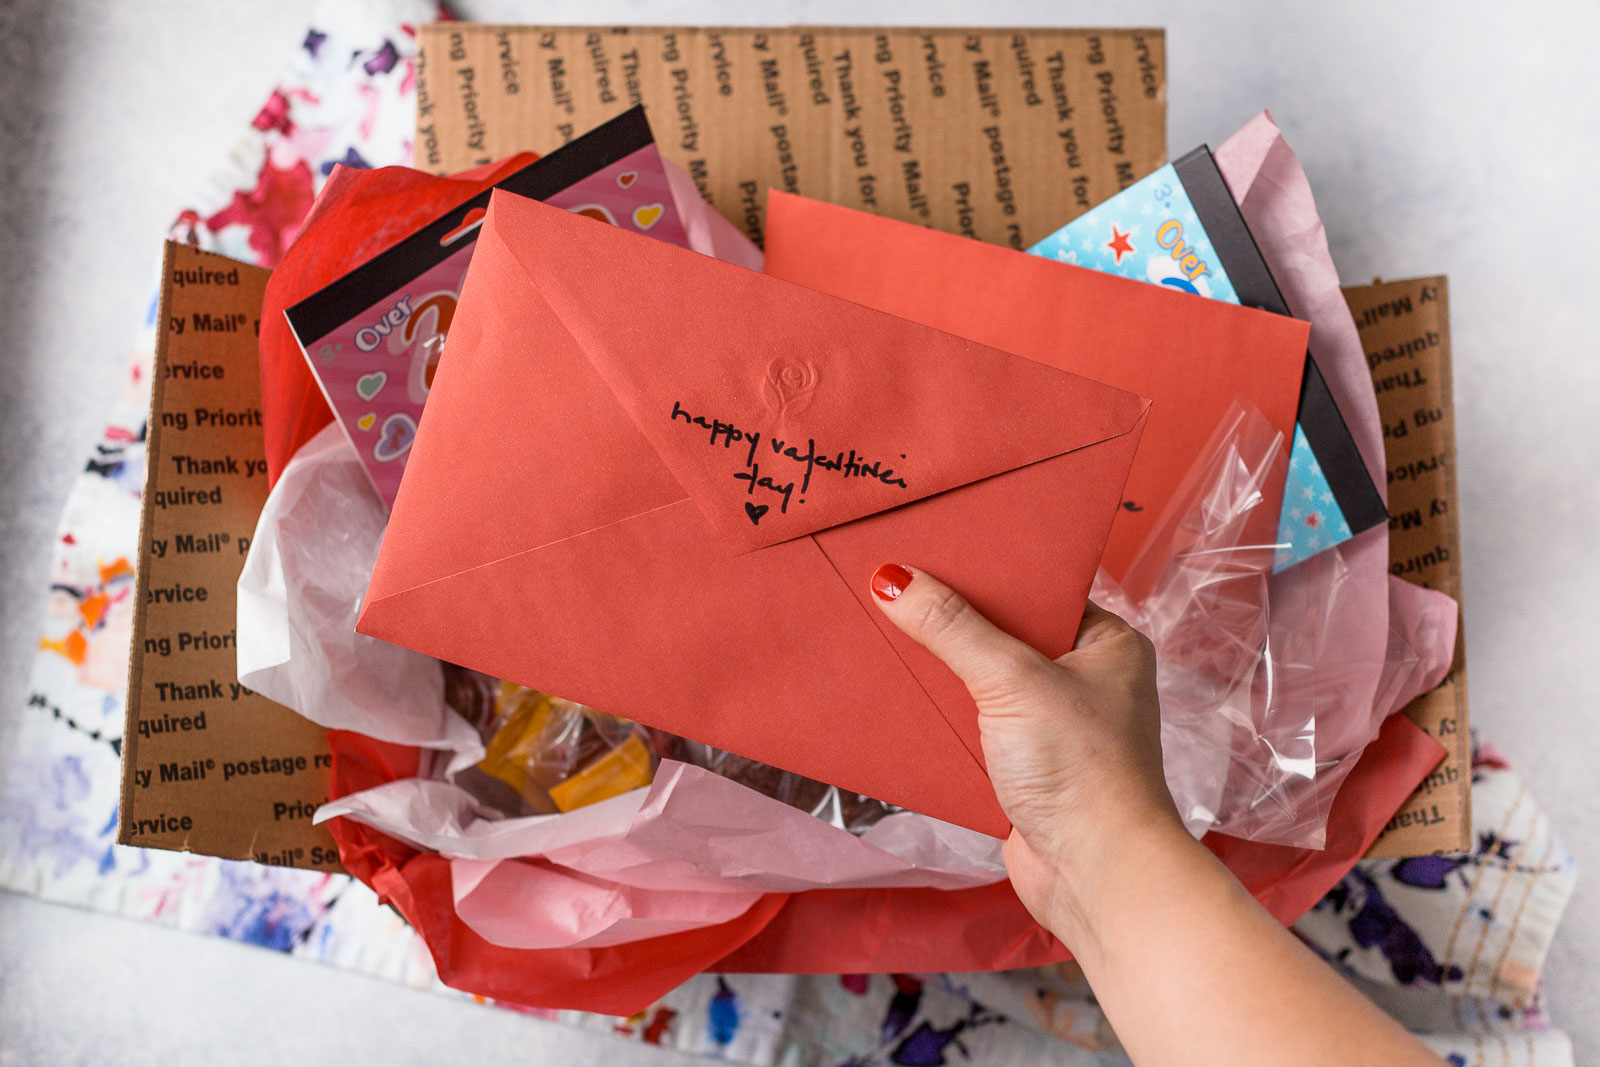 how to put together a valentine's day care package for a niece & nephew. tips & tricks for aunties to spoil their favorite little ones, even from a distance